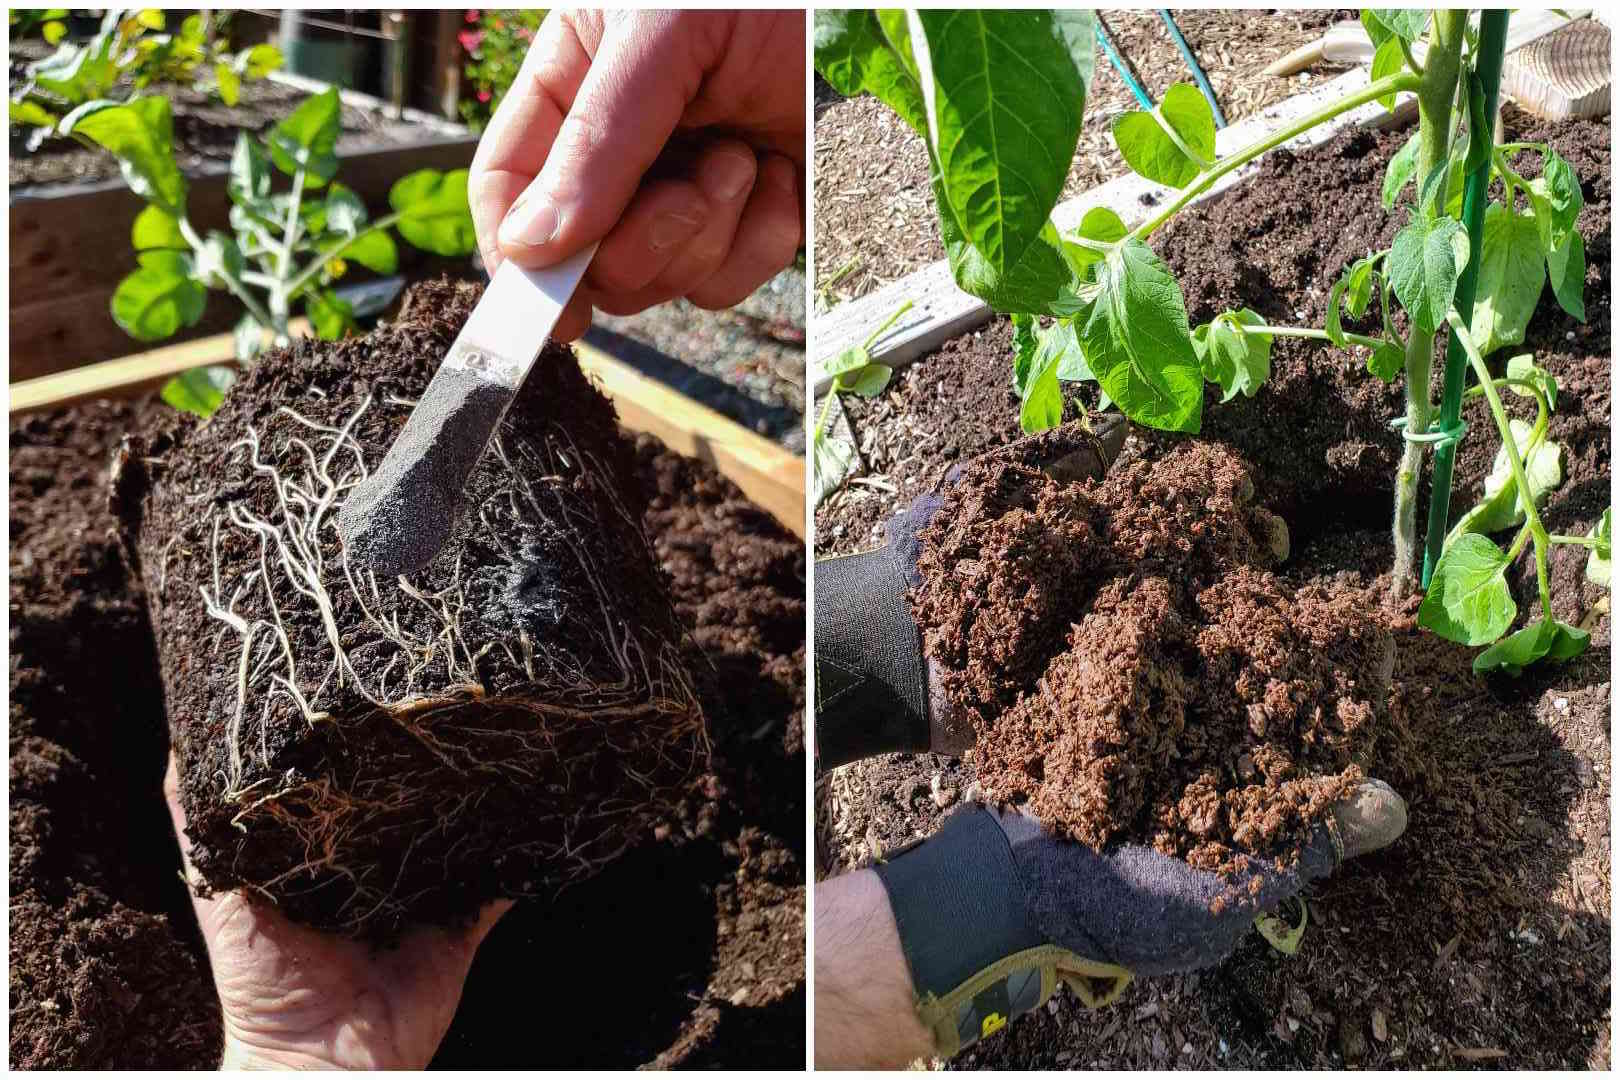 A two part image collage, the first image shows a young tomato seedling before it is transplanted outdoors. A hand is holding it by the root ball as if the plant was laying down, another hand is holding a teaspoon of mycorrhizae that will be sprinkled directly over the root ball.  The second image shows two hands holding dark, rich, and fluffy compost directly over the root zone of a newly transplanted tomato. 